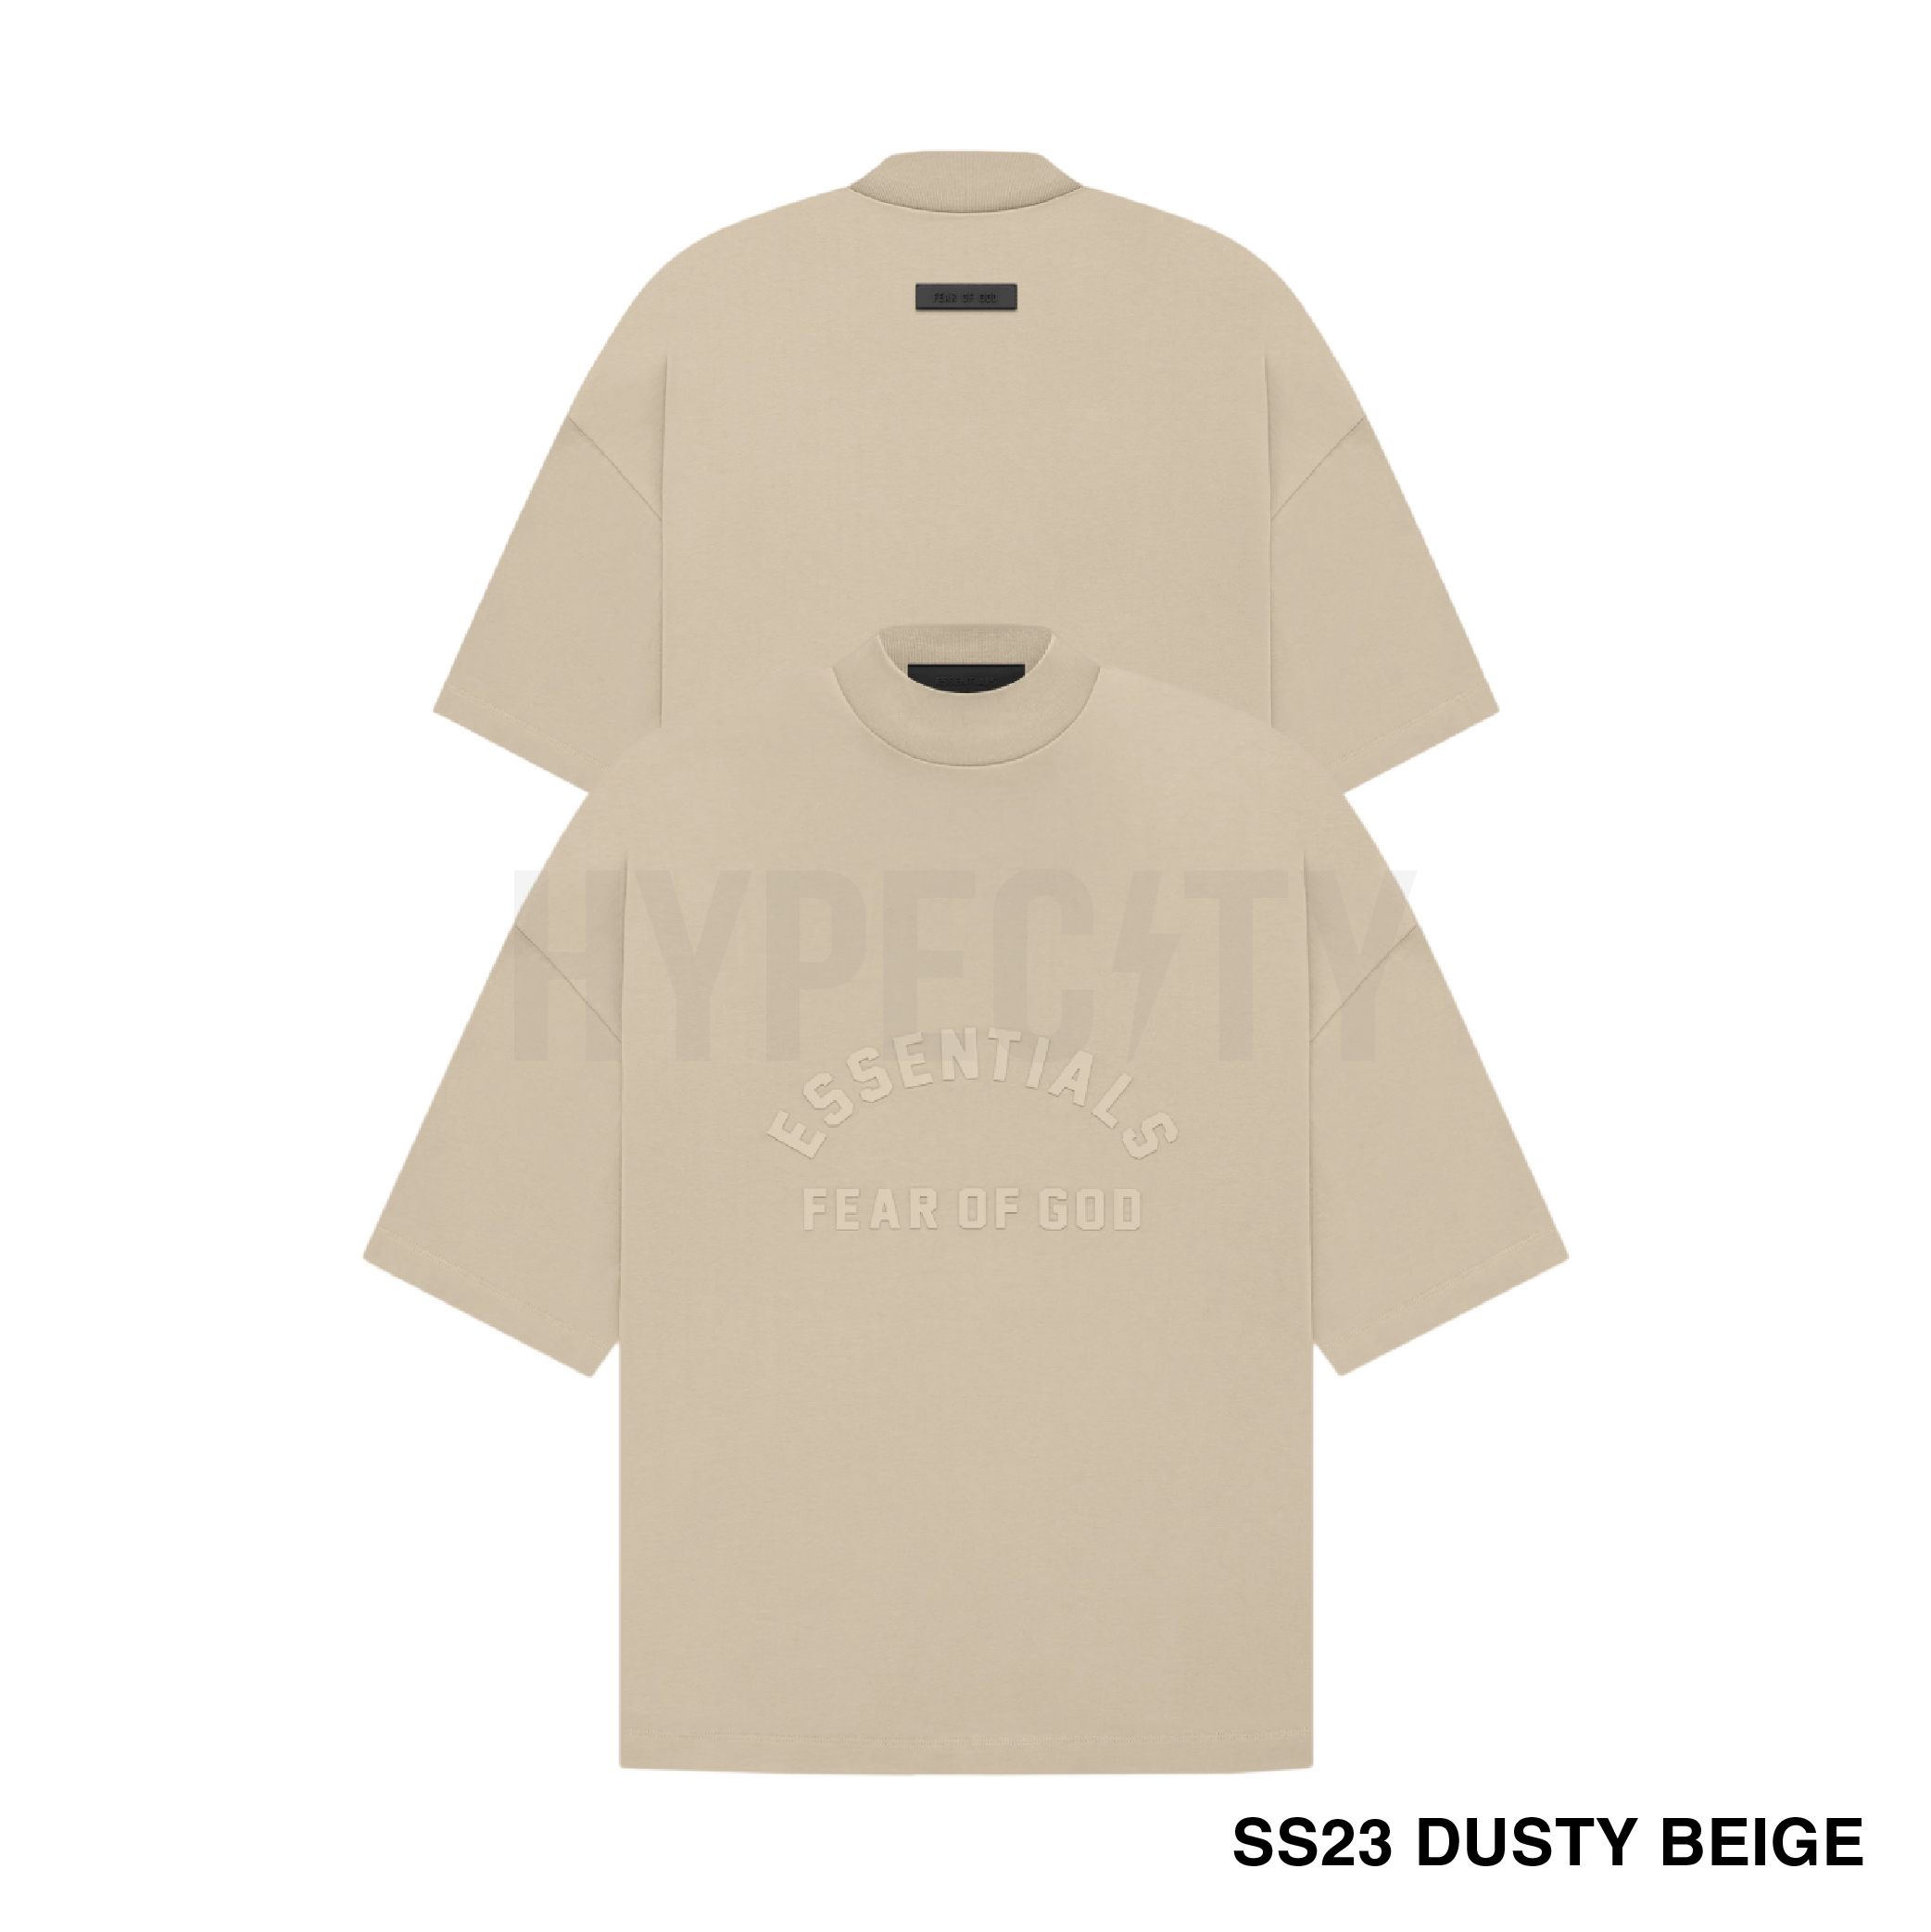 01.09.23 Fear Of God Essentials SS23 Bonded Tee-07